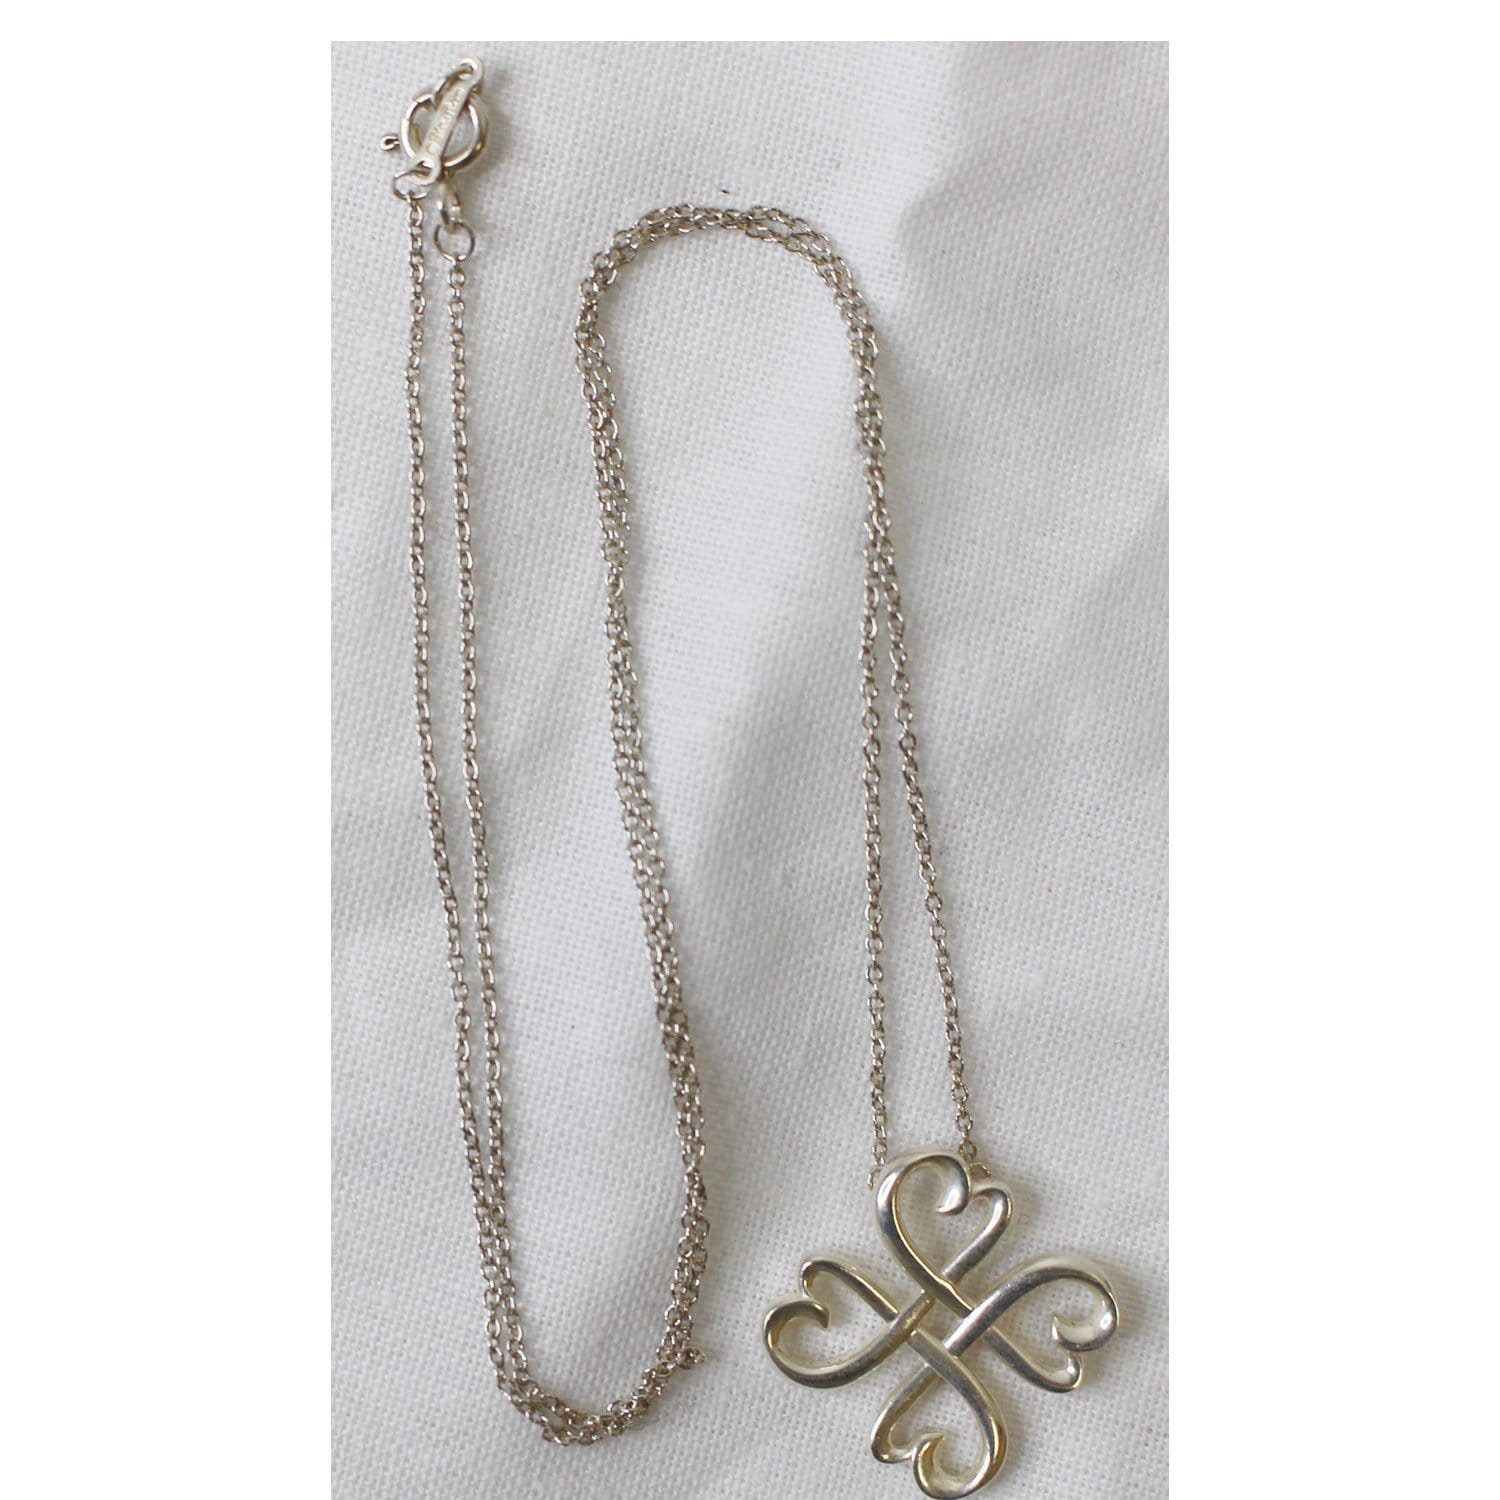 Tiffany & Co. Four Leaf Clover Silver 925 / Gold 18k Charm Pendant  Necklace16.3